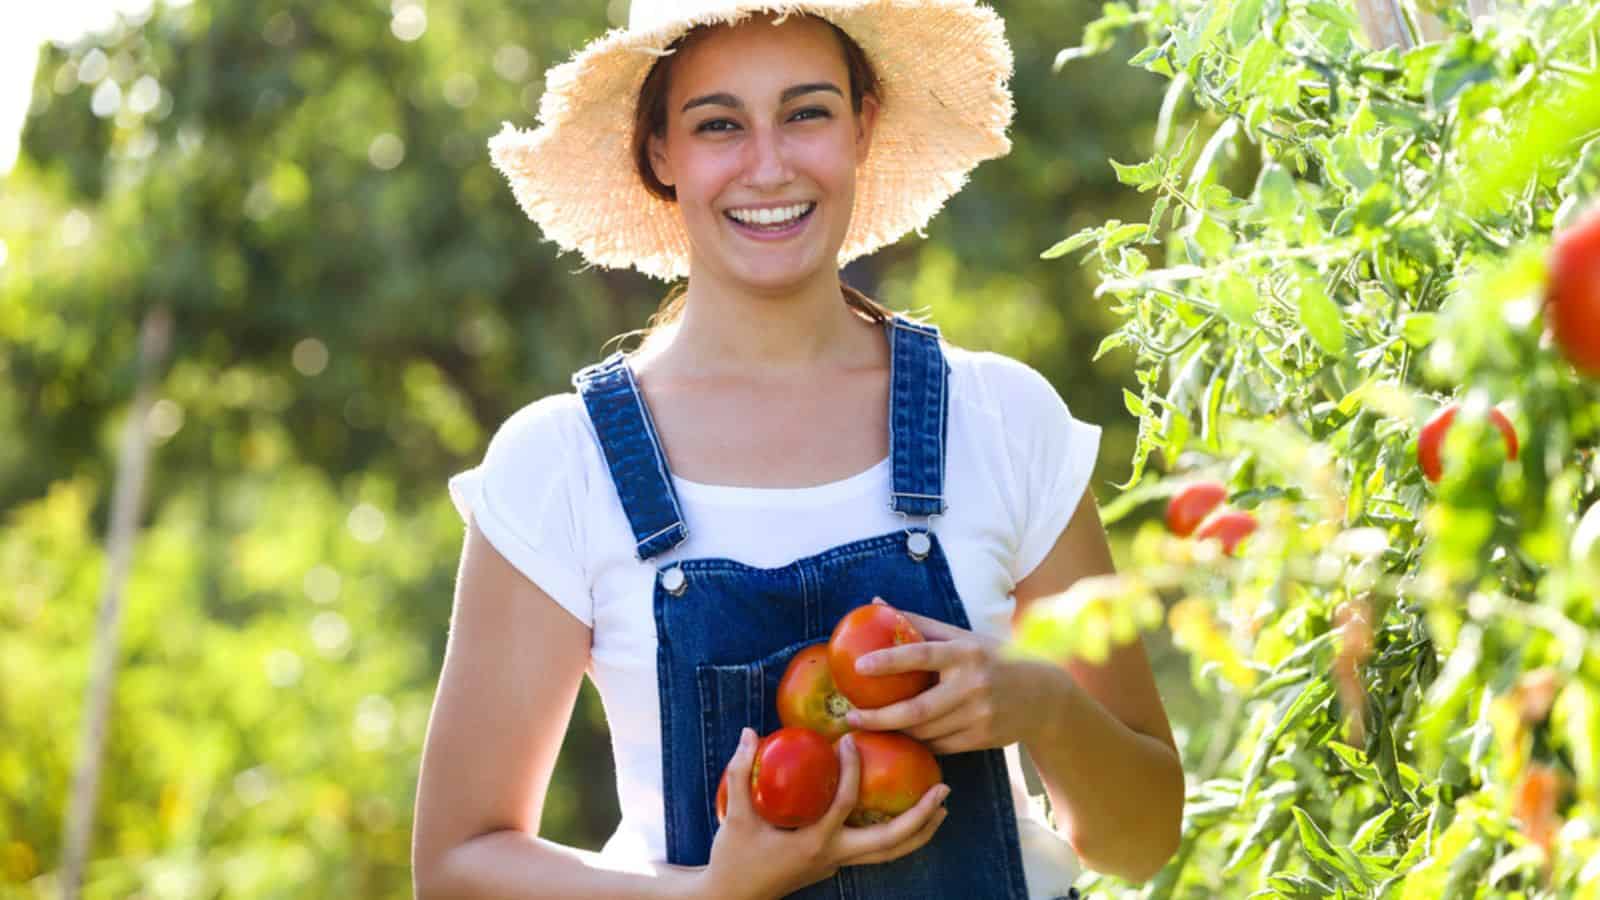 Portrait of beautiful young smiling woman harvesting fresh tomatoes from the garden